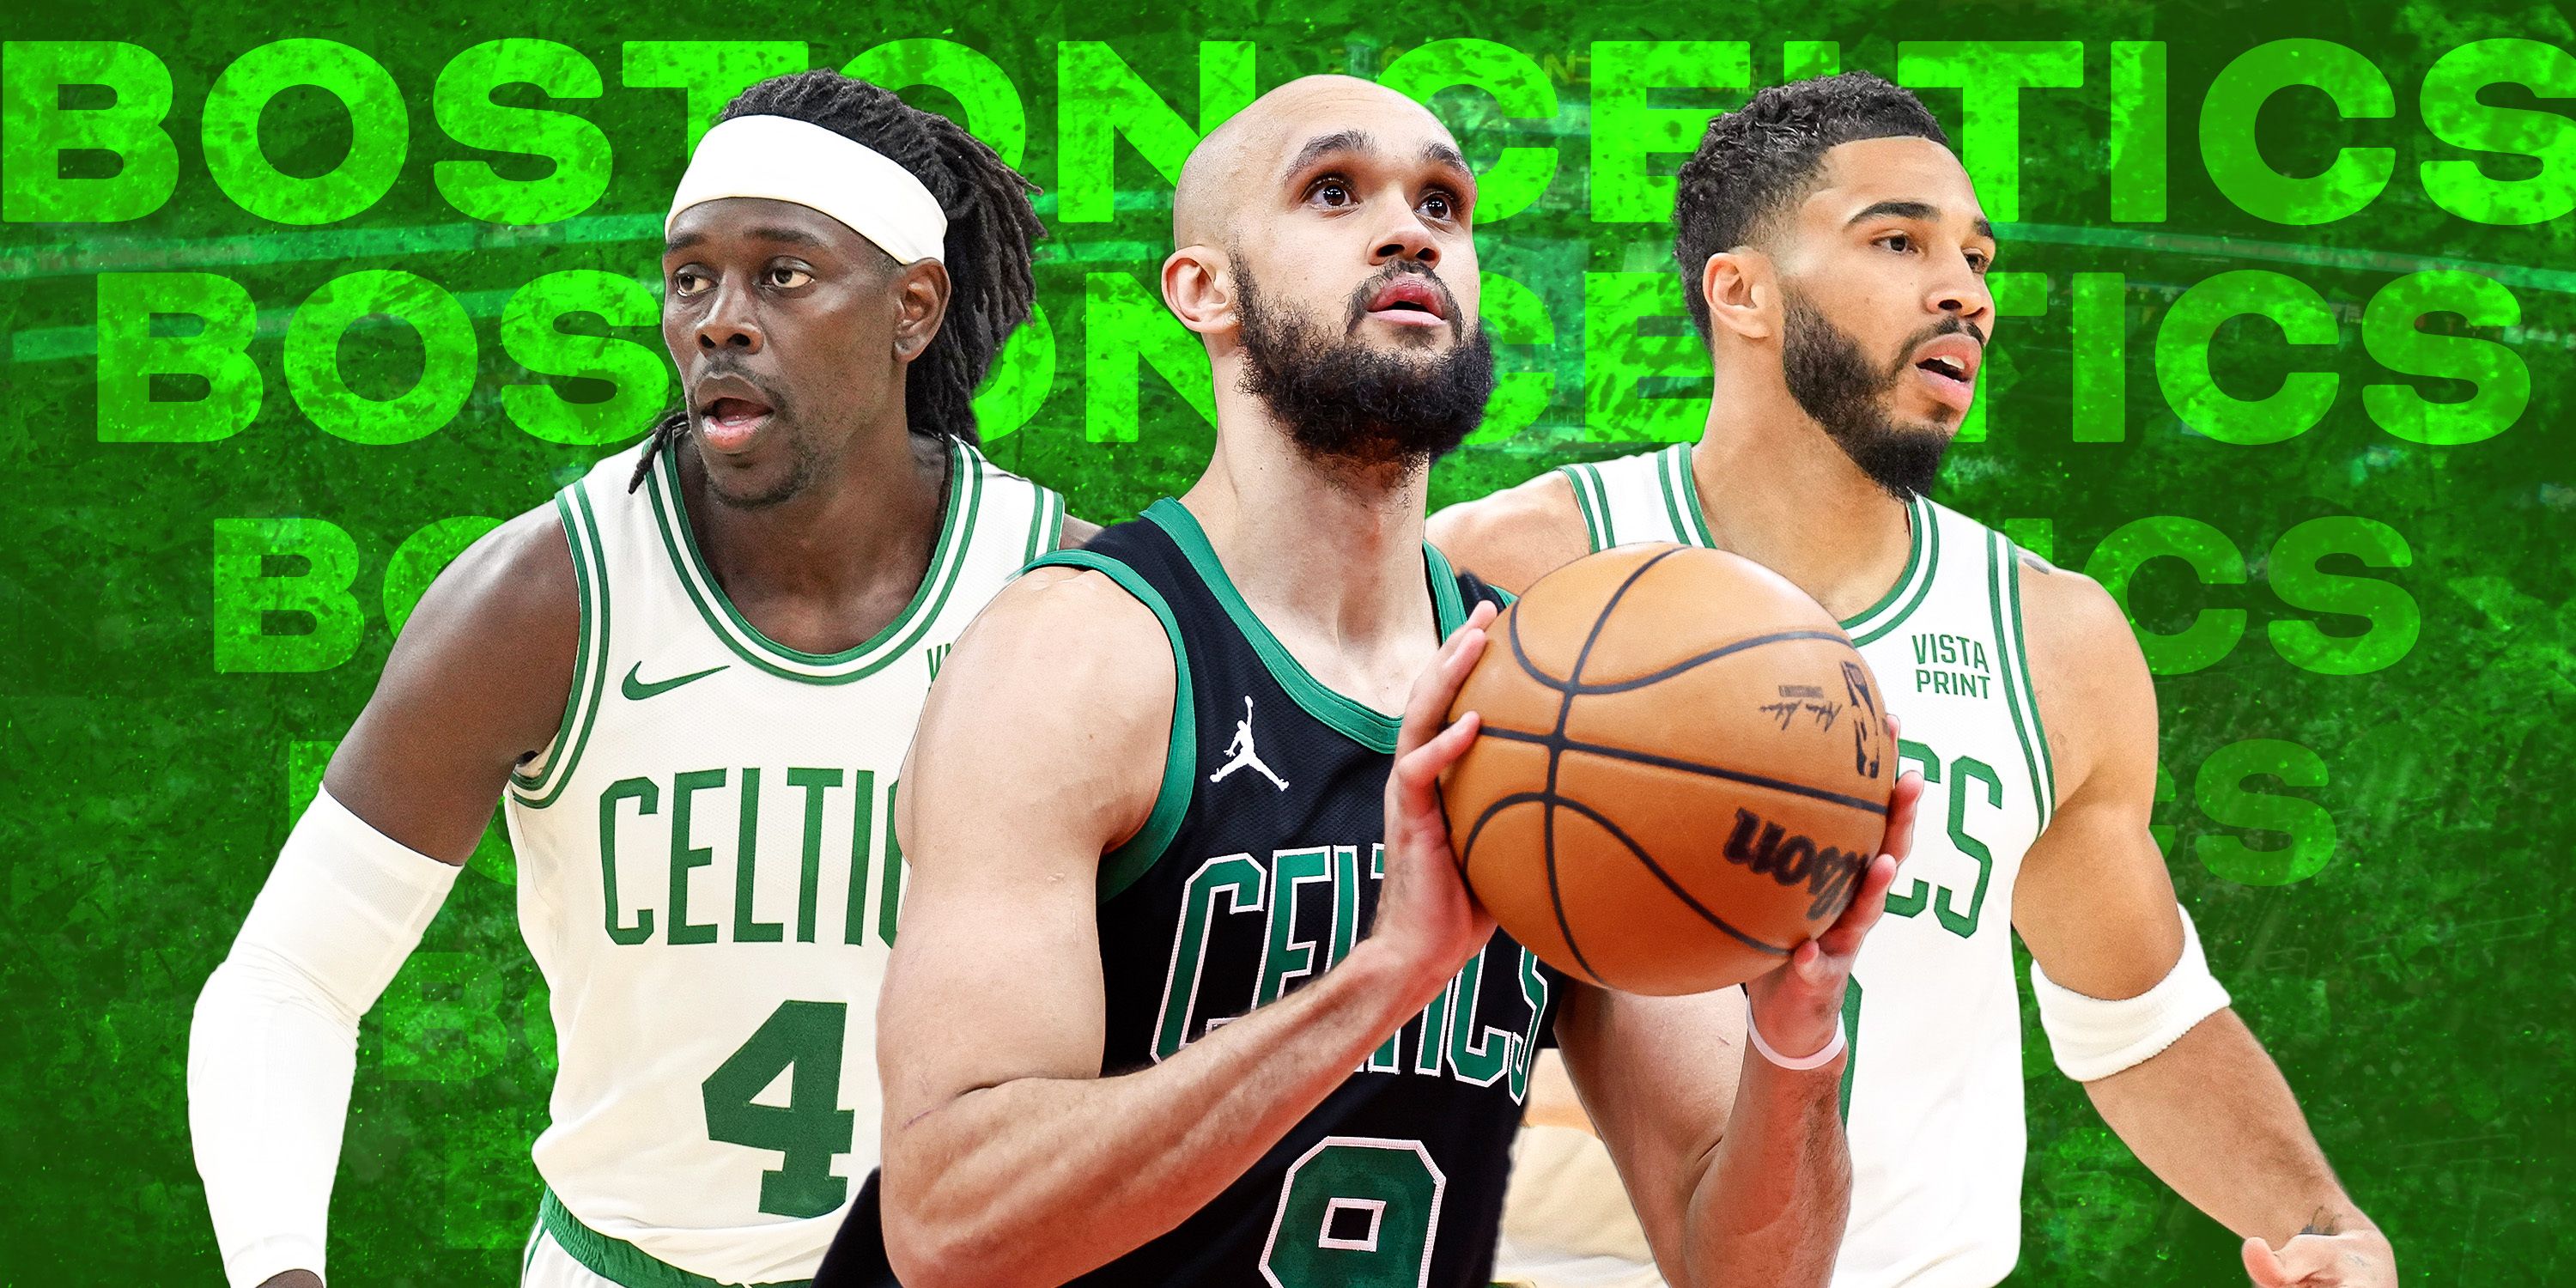 The Boston Celtics Roster Construction is Built for an NBA Championship